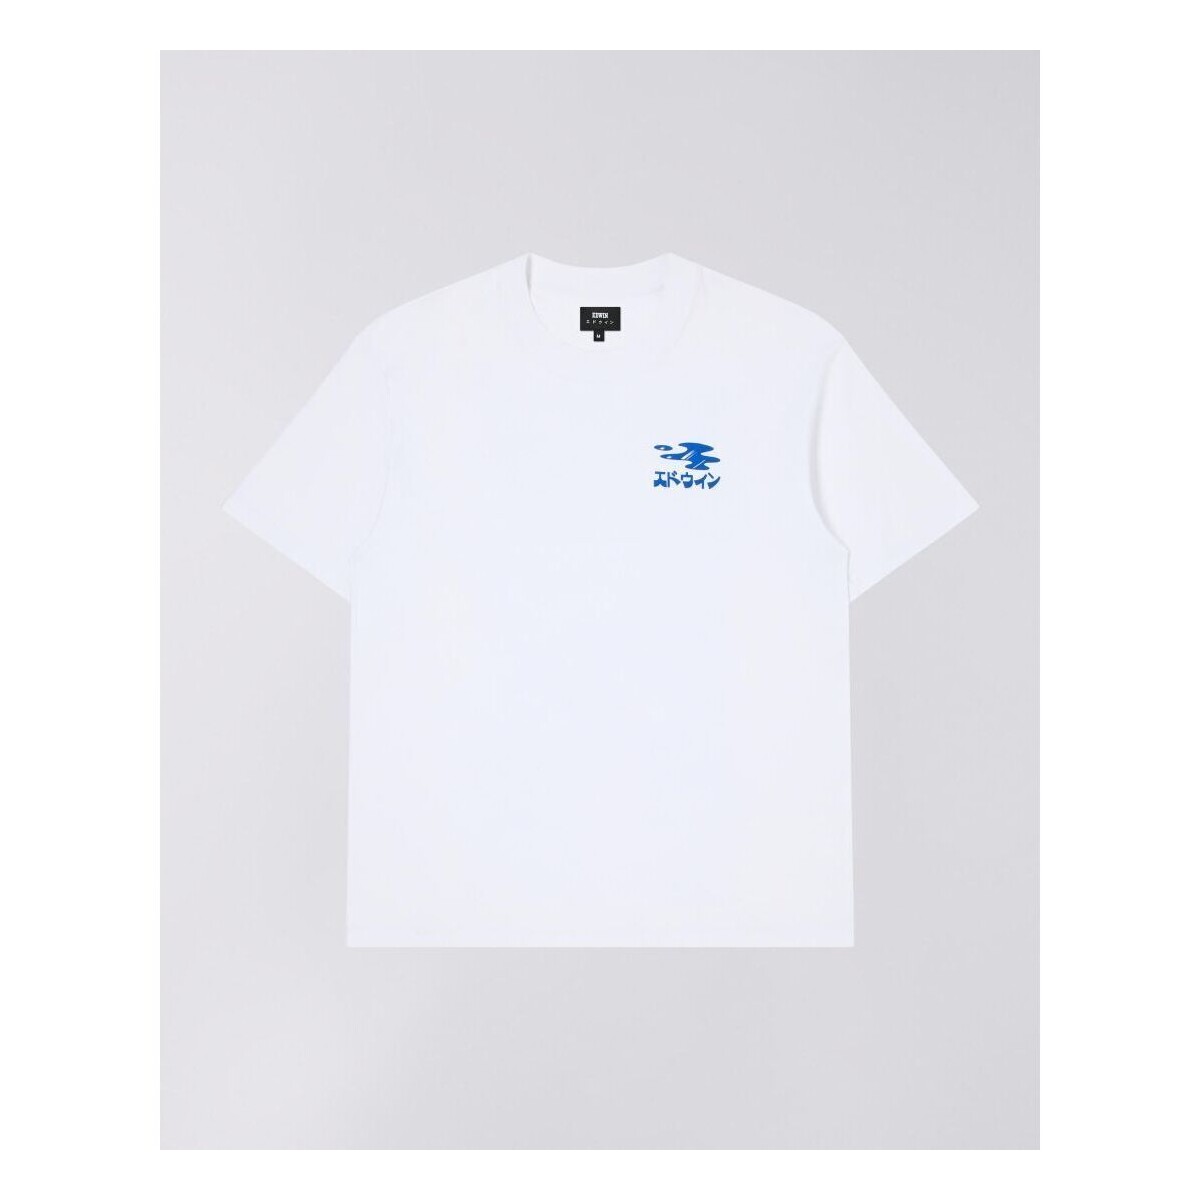 Vêtements Homme T-shirts short & Polos Edwin I033490.02.67. STAY HYDRATED-02.67 WHITE Blanc